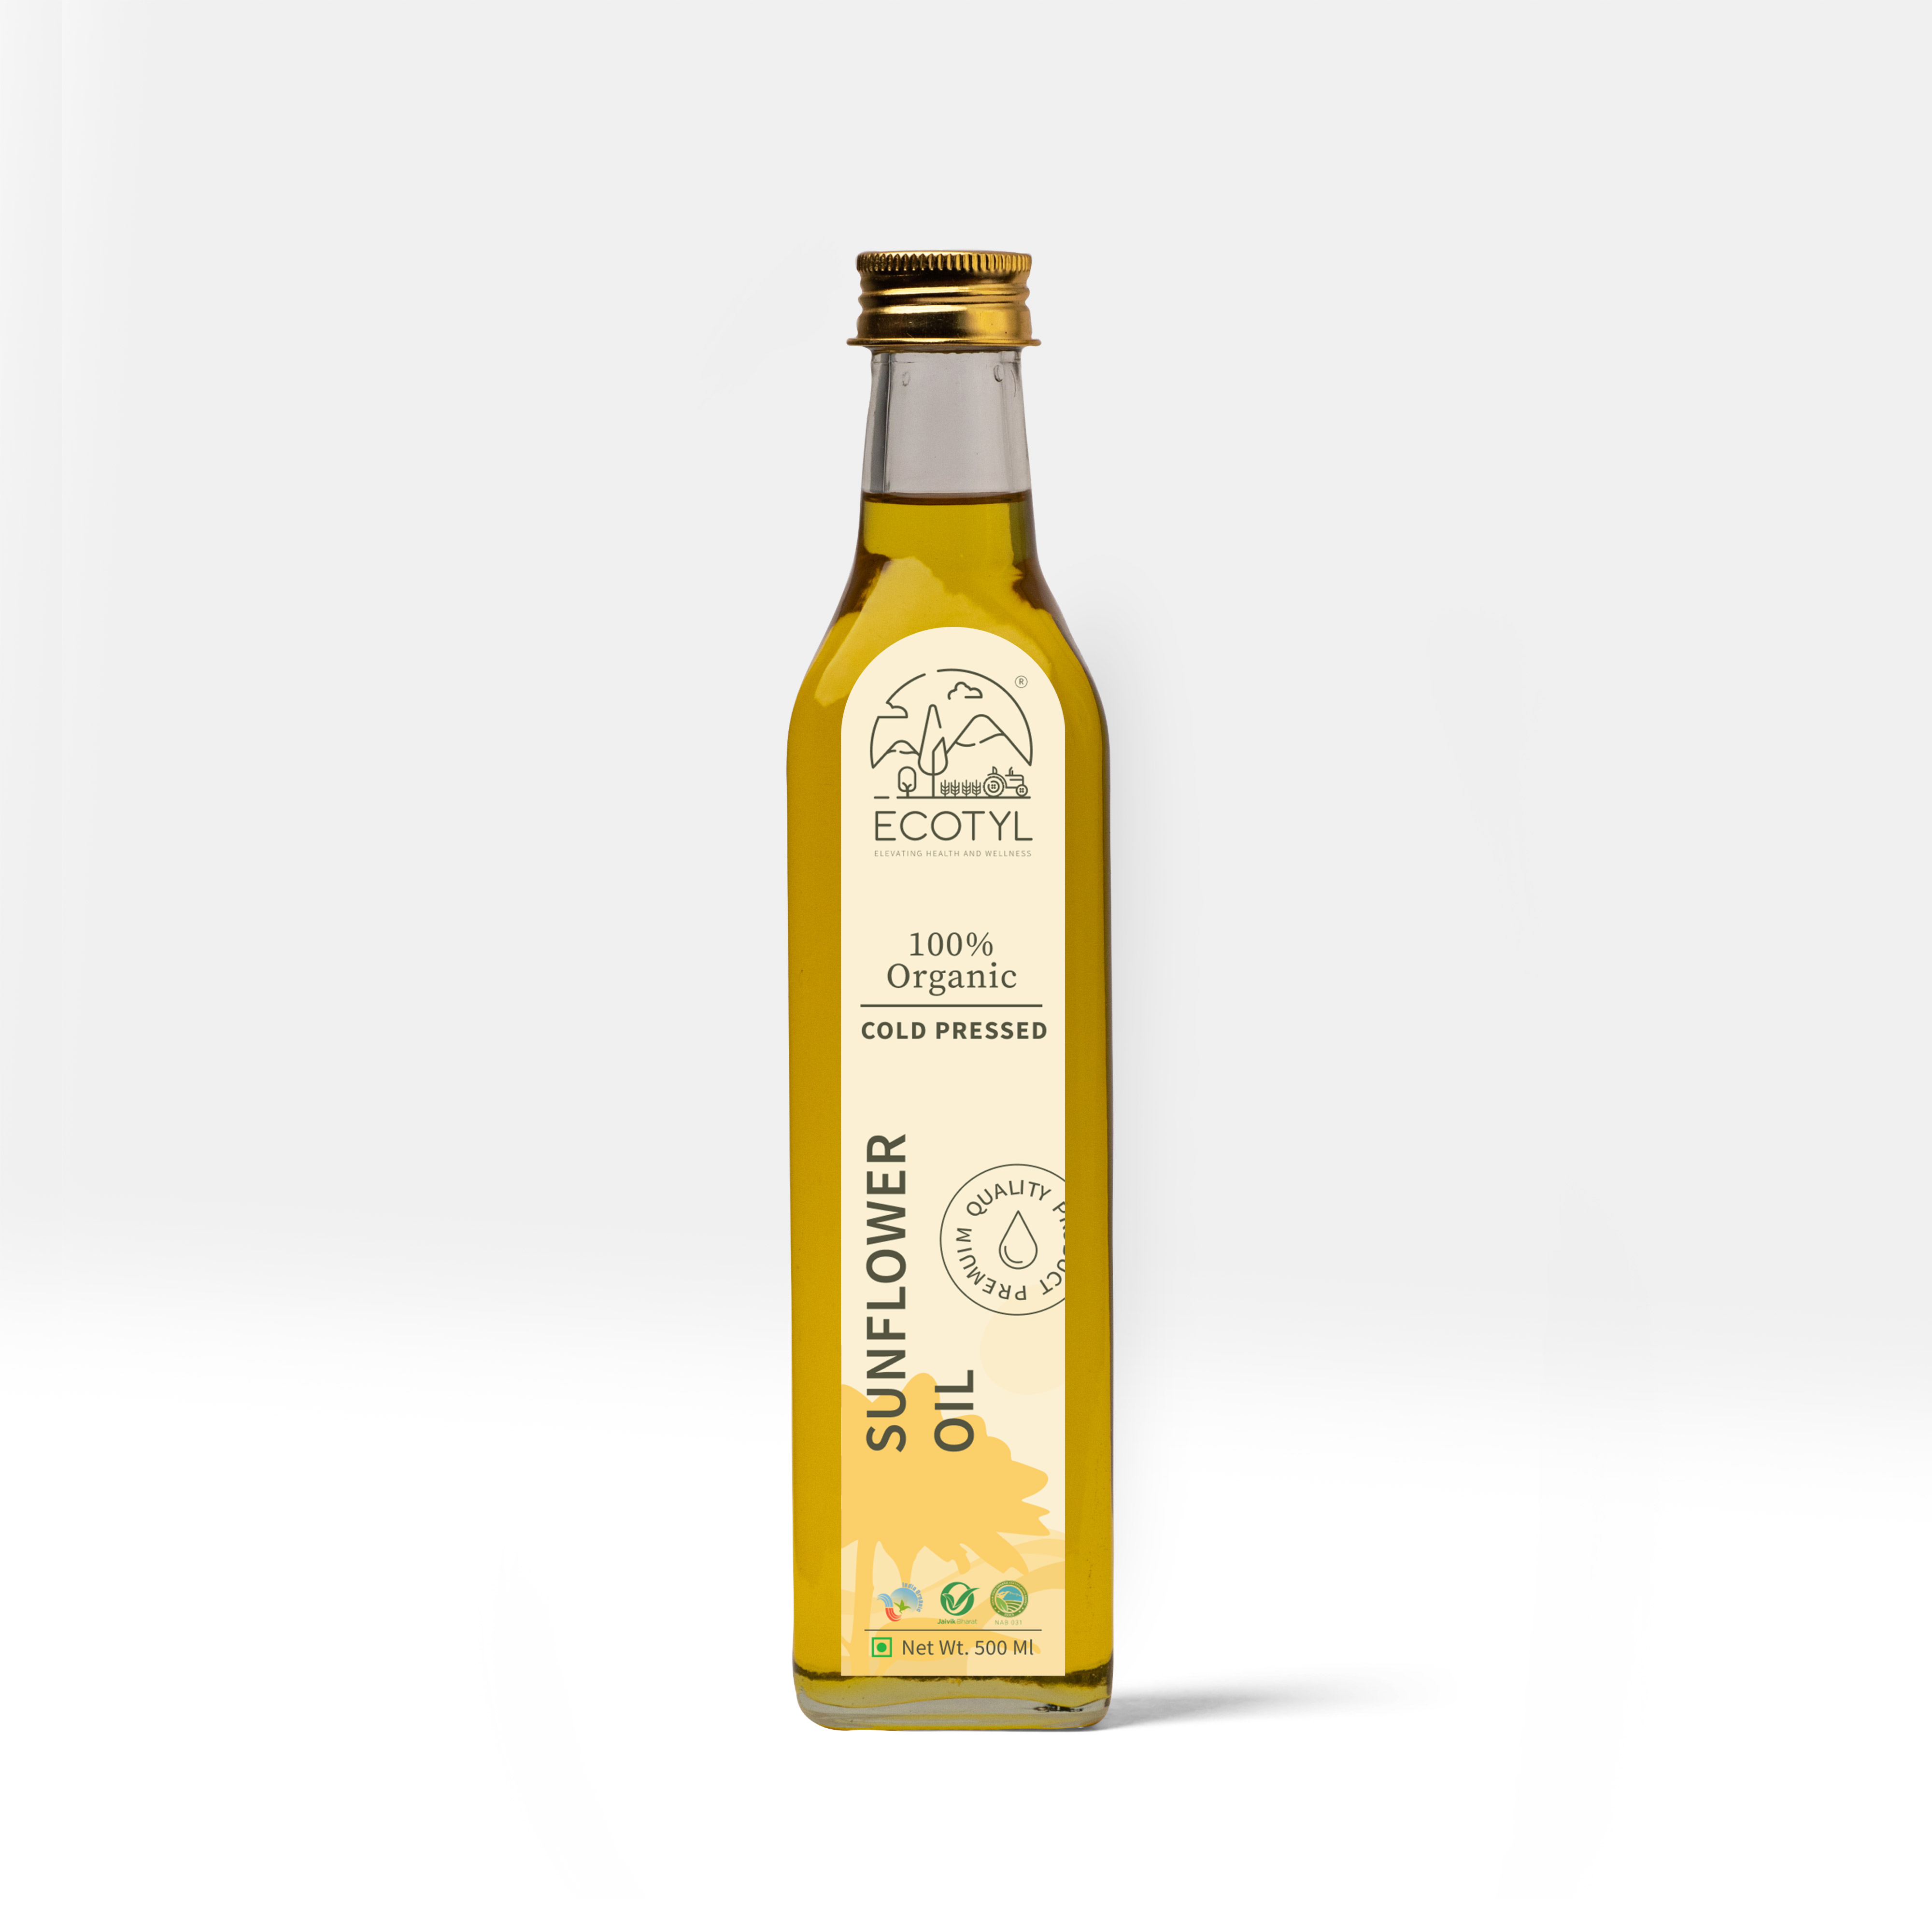 Buy Ecotyl Organic Cold-Pressed Sunflower Oil - 500 ml at Best Price Online